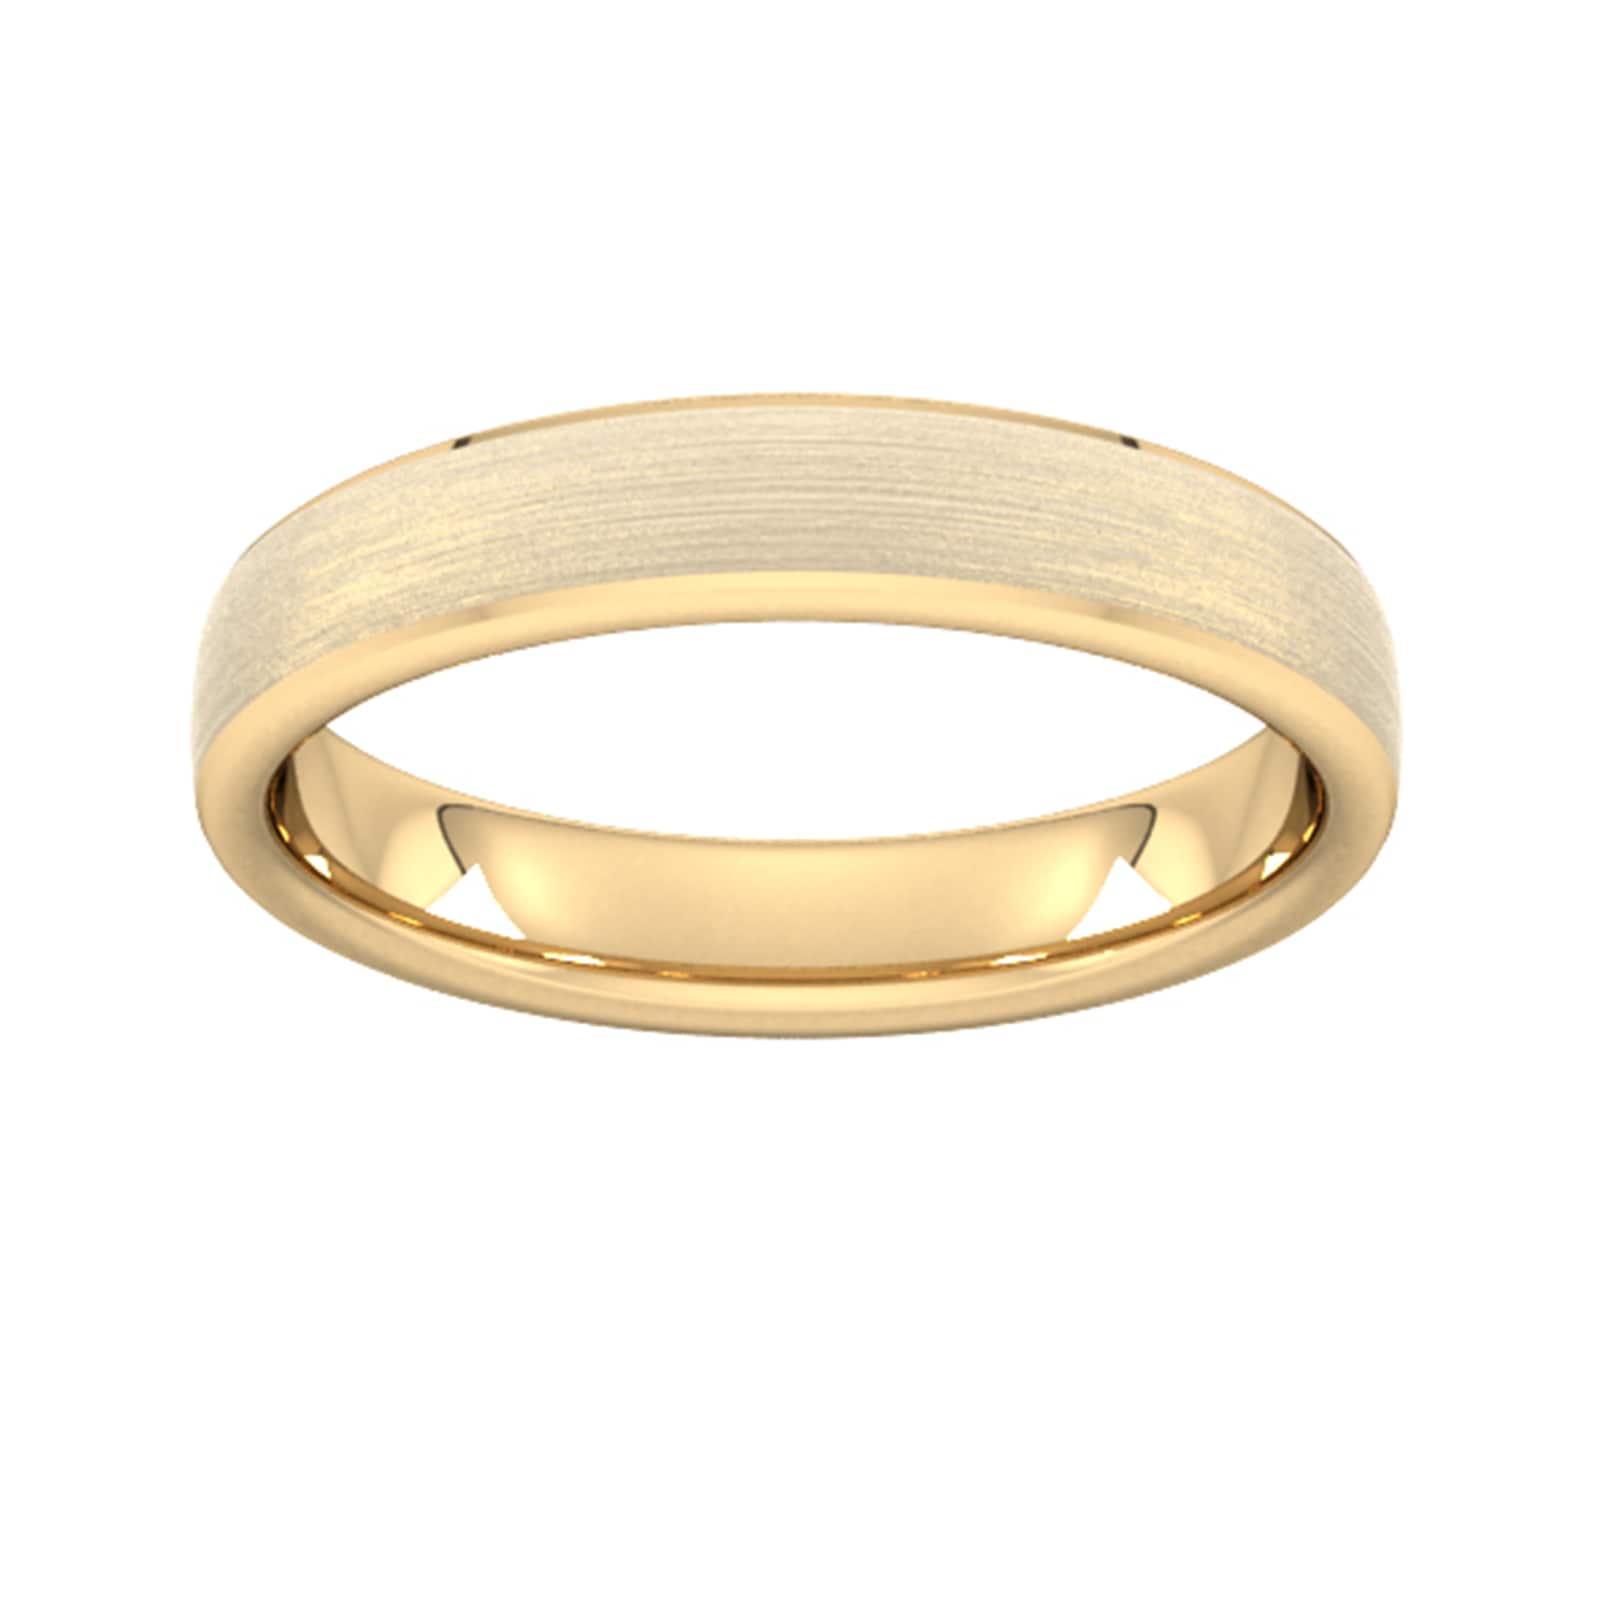 4mm D Shape Standard Polished Chamfered Edges With Matt Centre Wedding Ring In 18 Carat Yellow Gold - Ring Size S